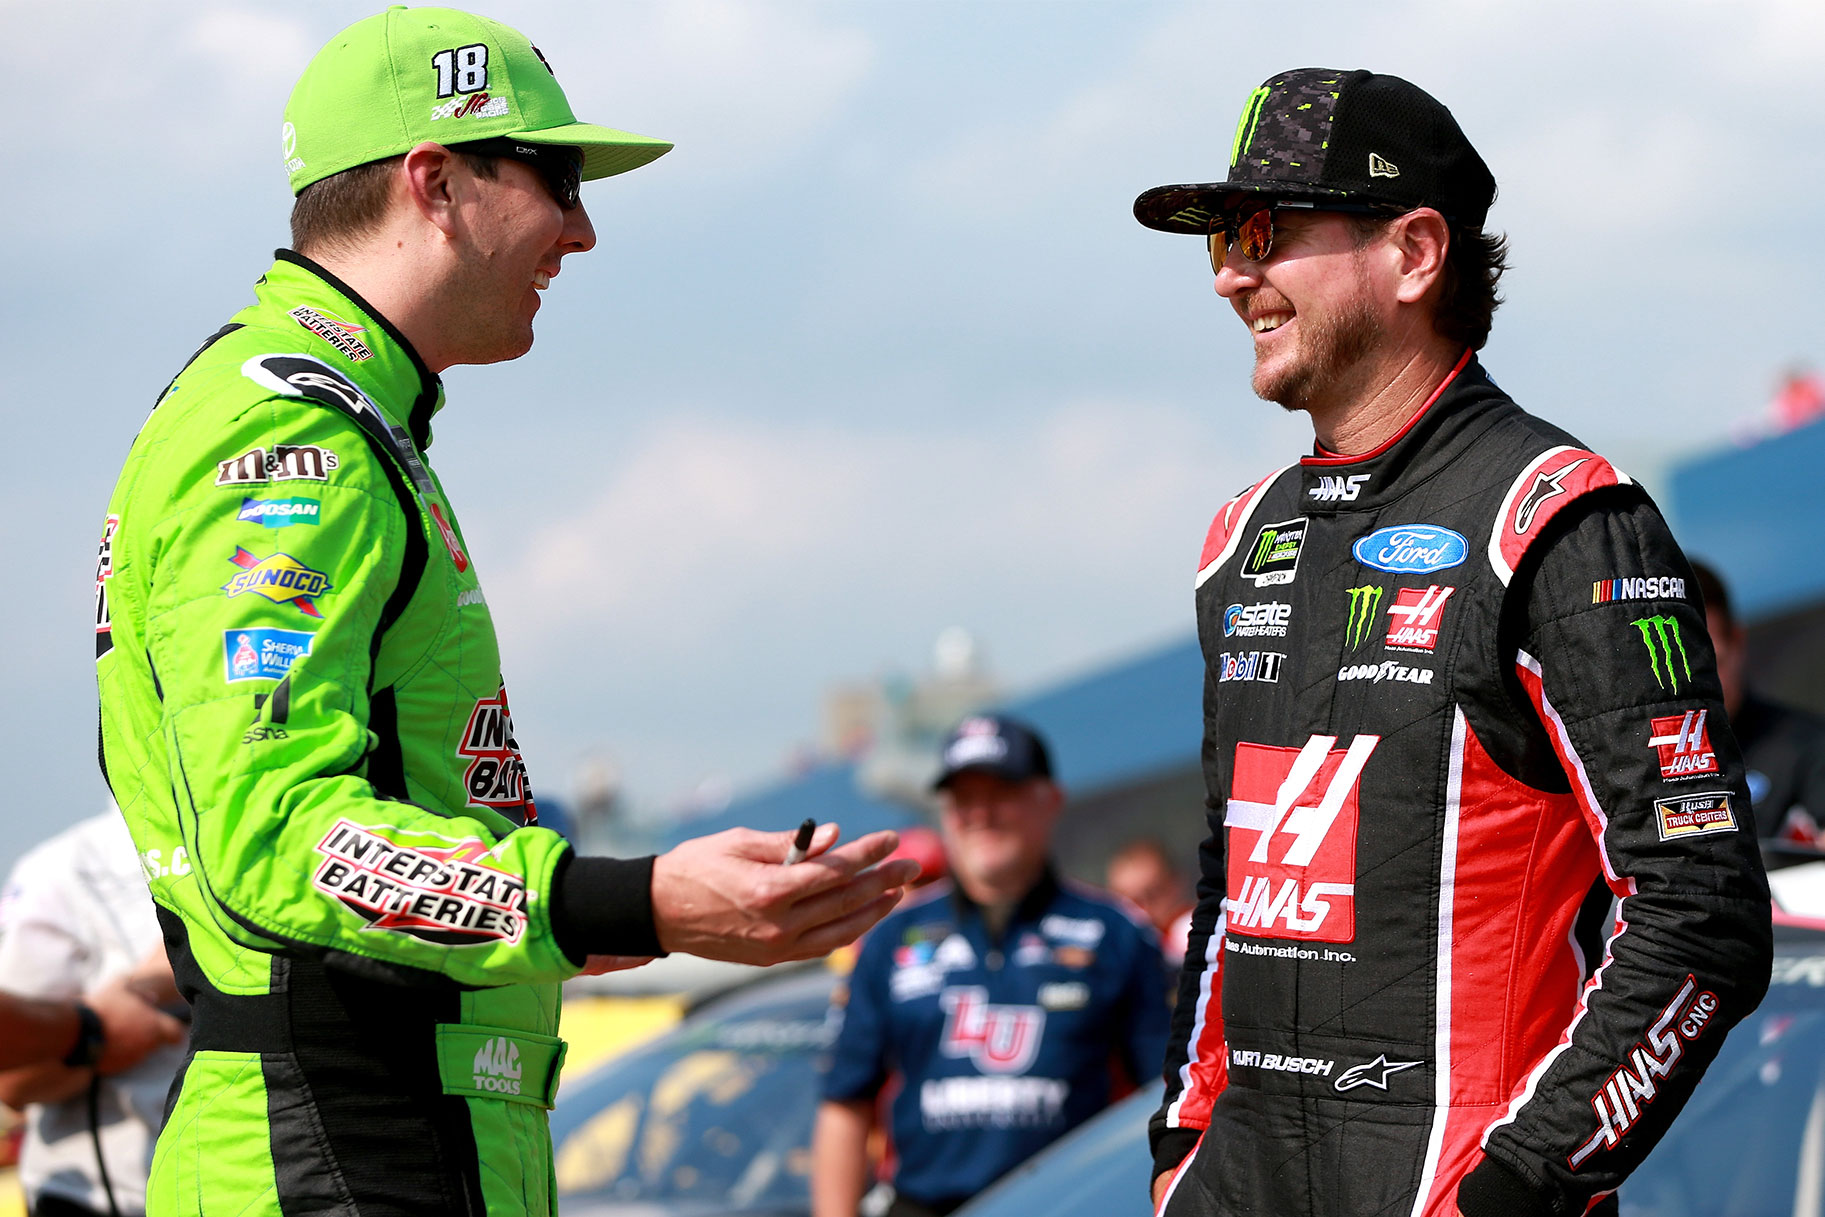 Kyle Busch and Kurt Busch stand together at the Monster Energy NASCAR Cup Series at Michigan International Speedway